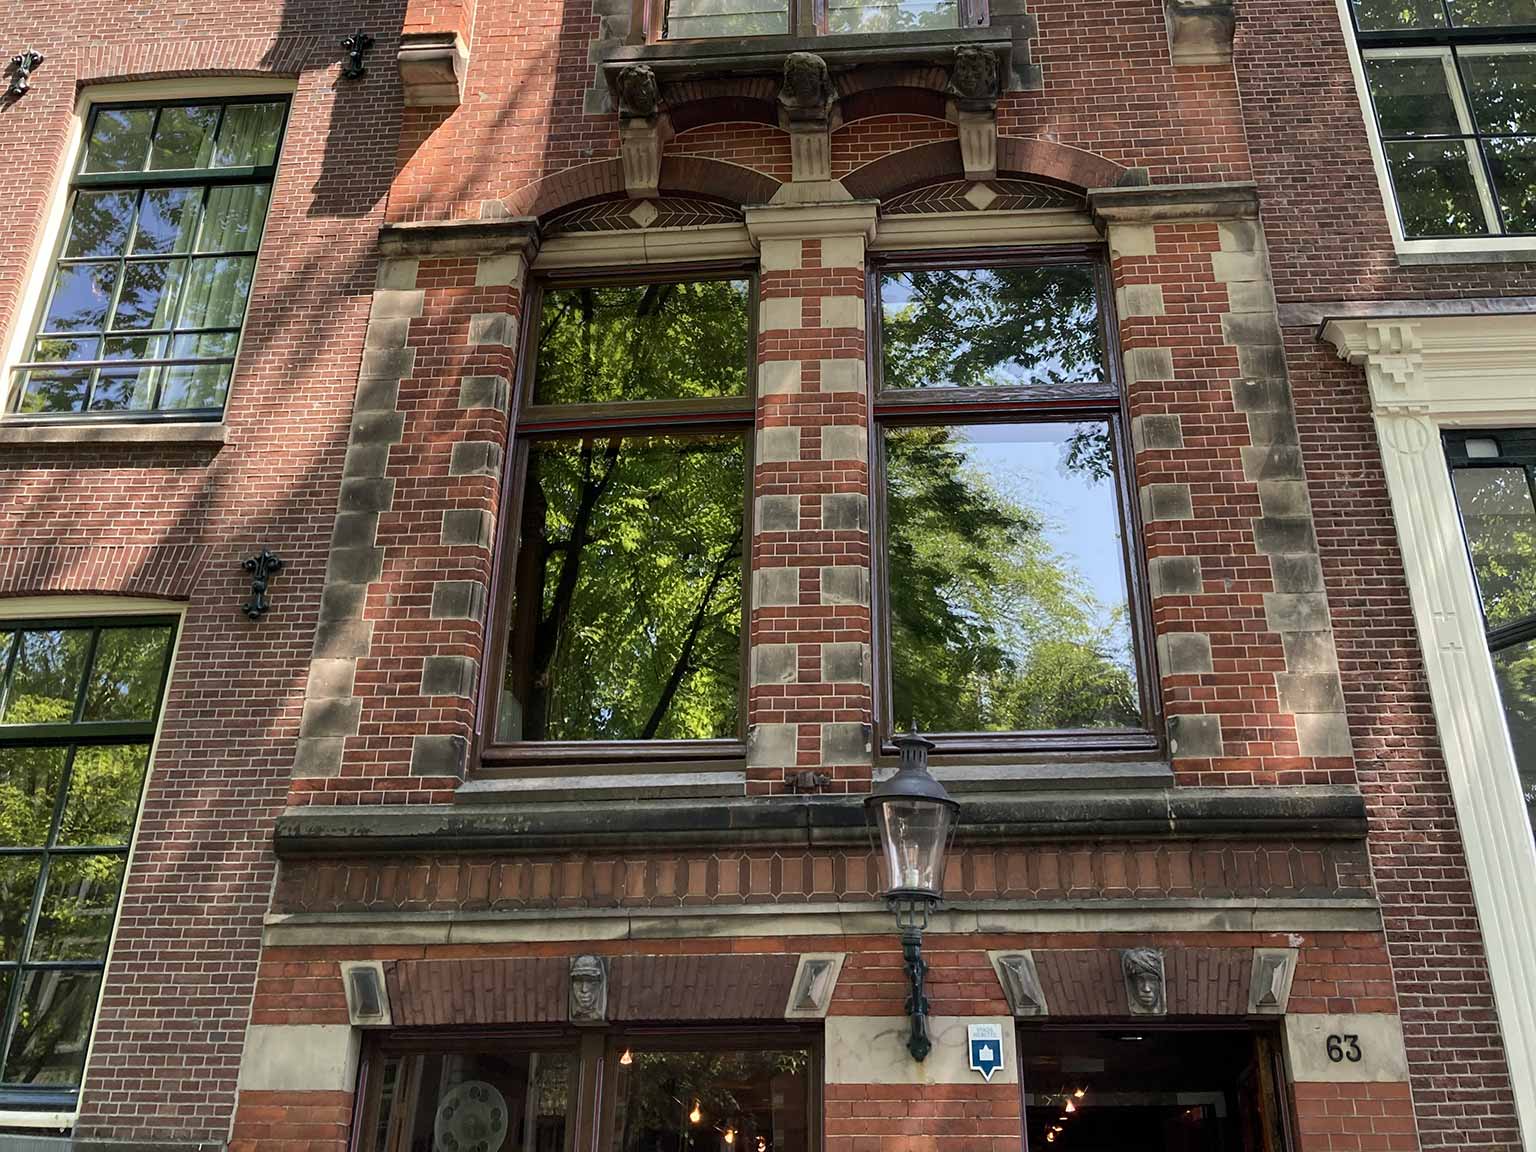 Details of the first floor front of Reguliergracht 63, Amsterdam